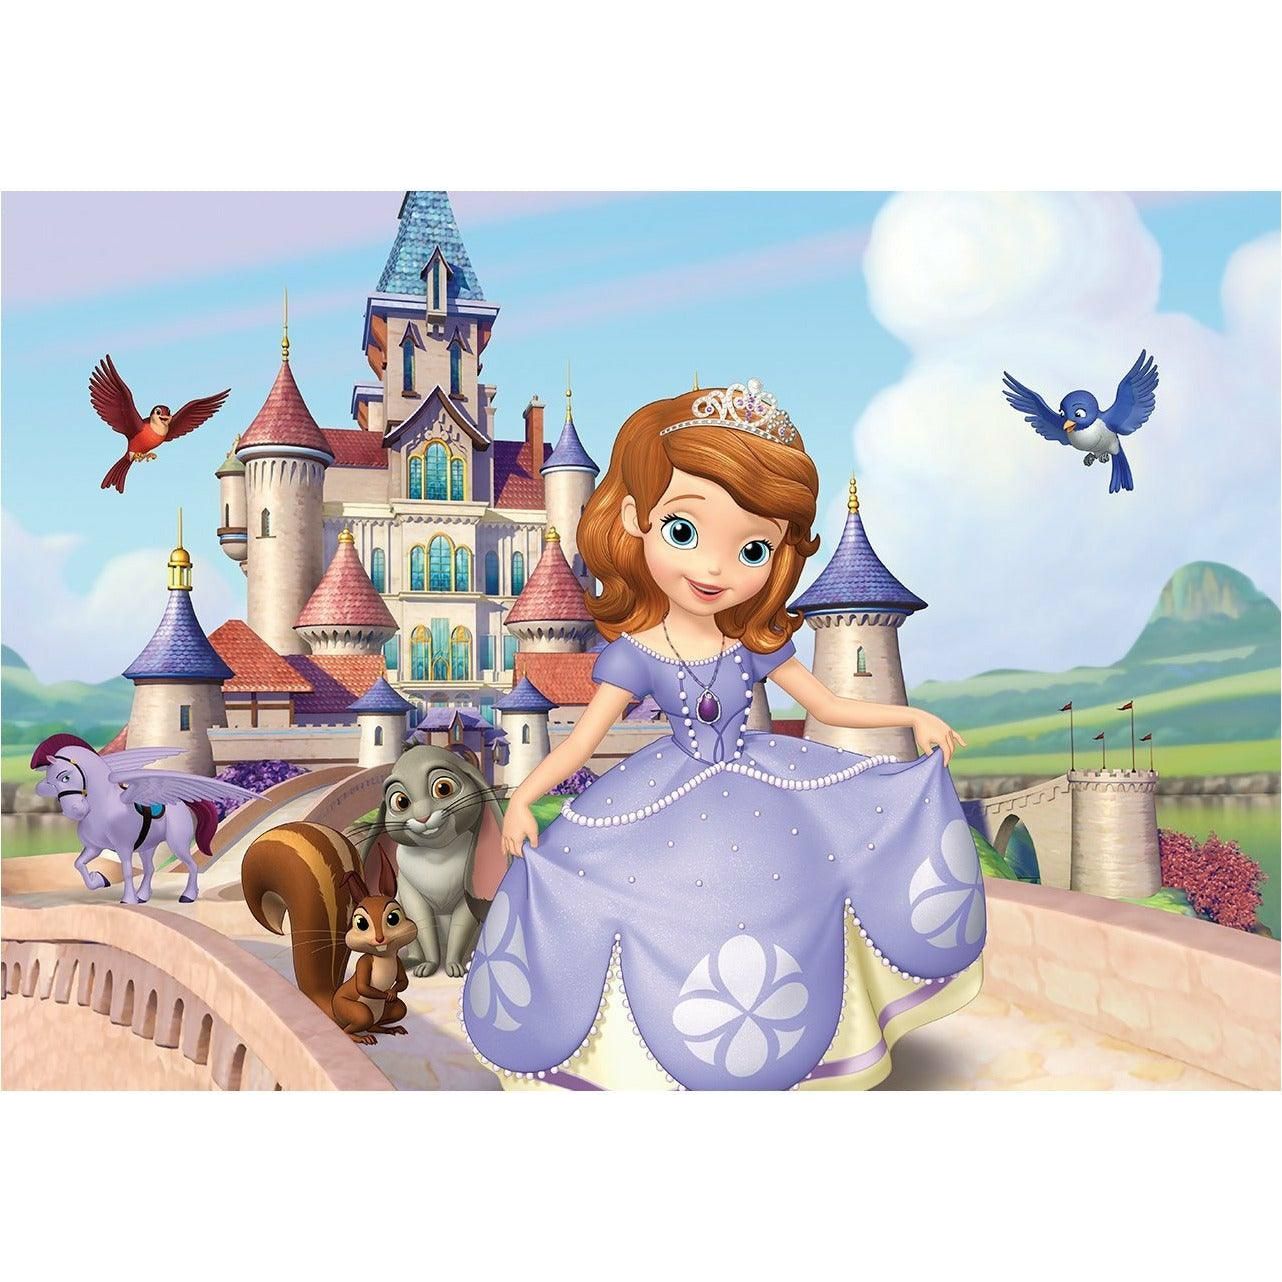 KS Games Kids Puzzle The Princess Sofia 100 Pieces - BumbleToys - 2-4 Years, 5-7 Years, Boys, Cecil, Disney Princess, Girls, Puzzle & Board & Card Games, Puzzles & Jigsaws